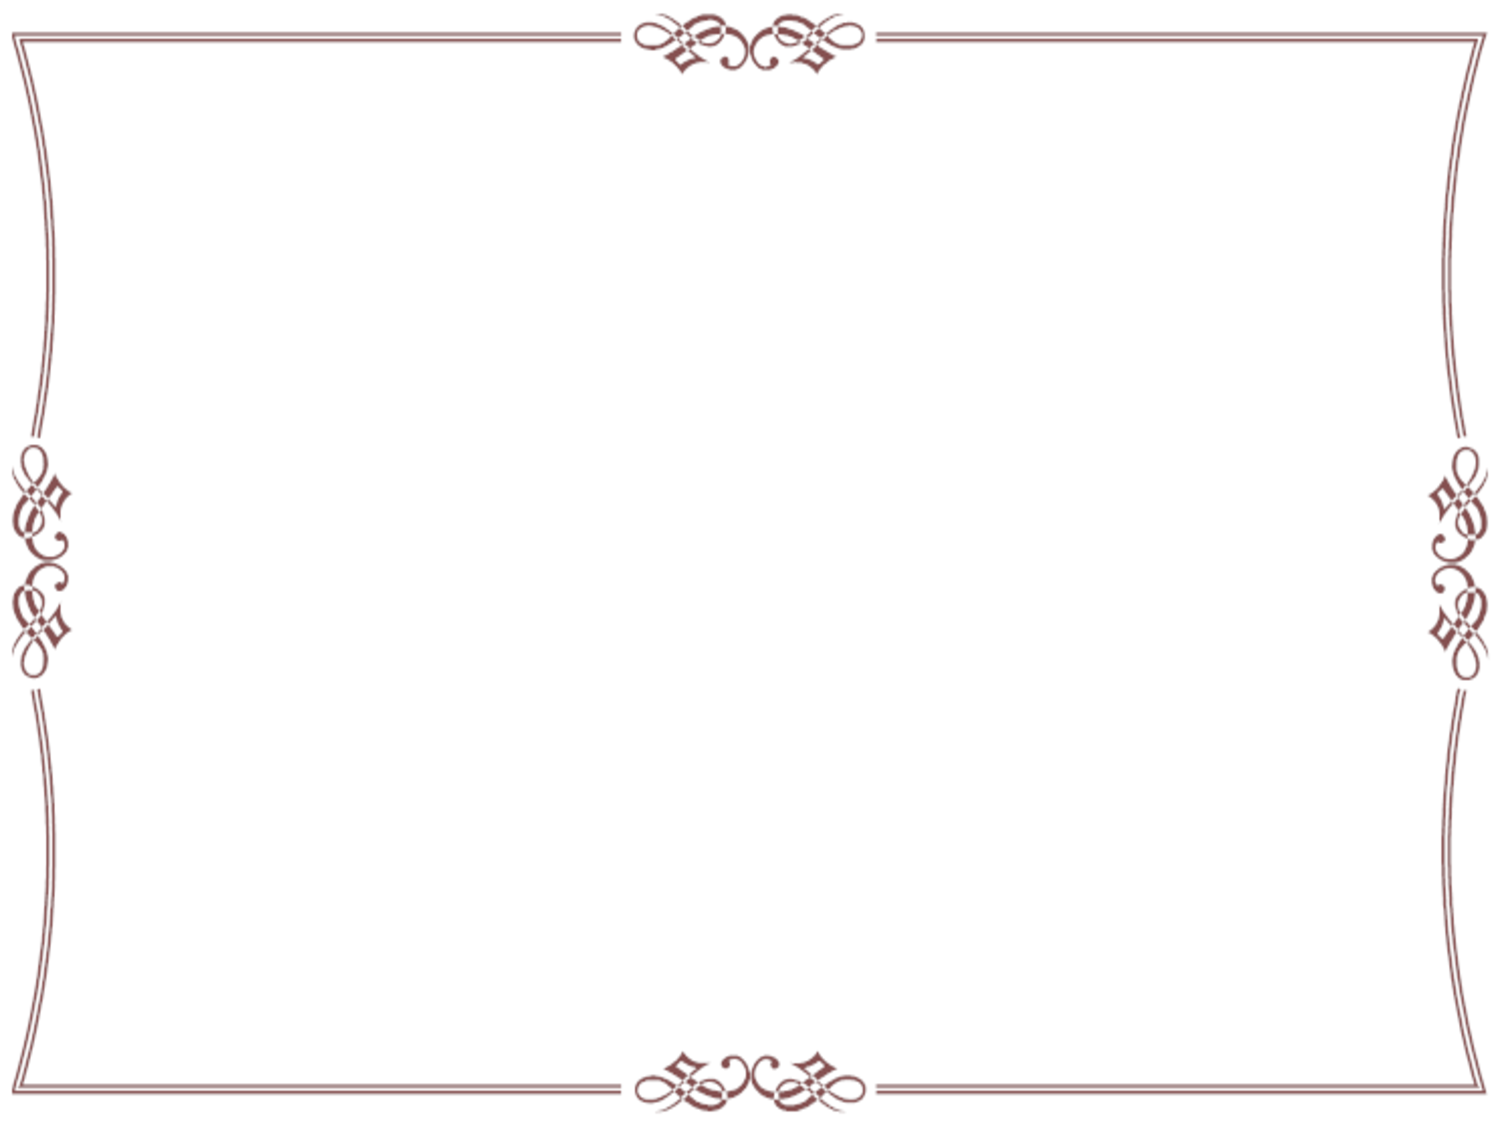 certificate clipart borders frames - photo #27